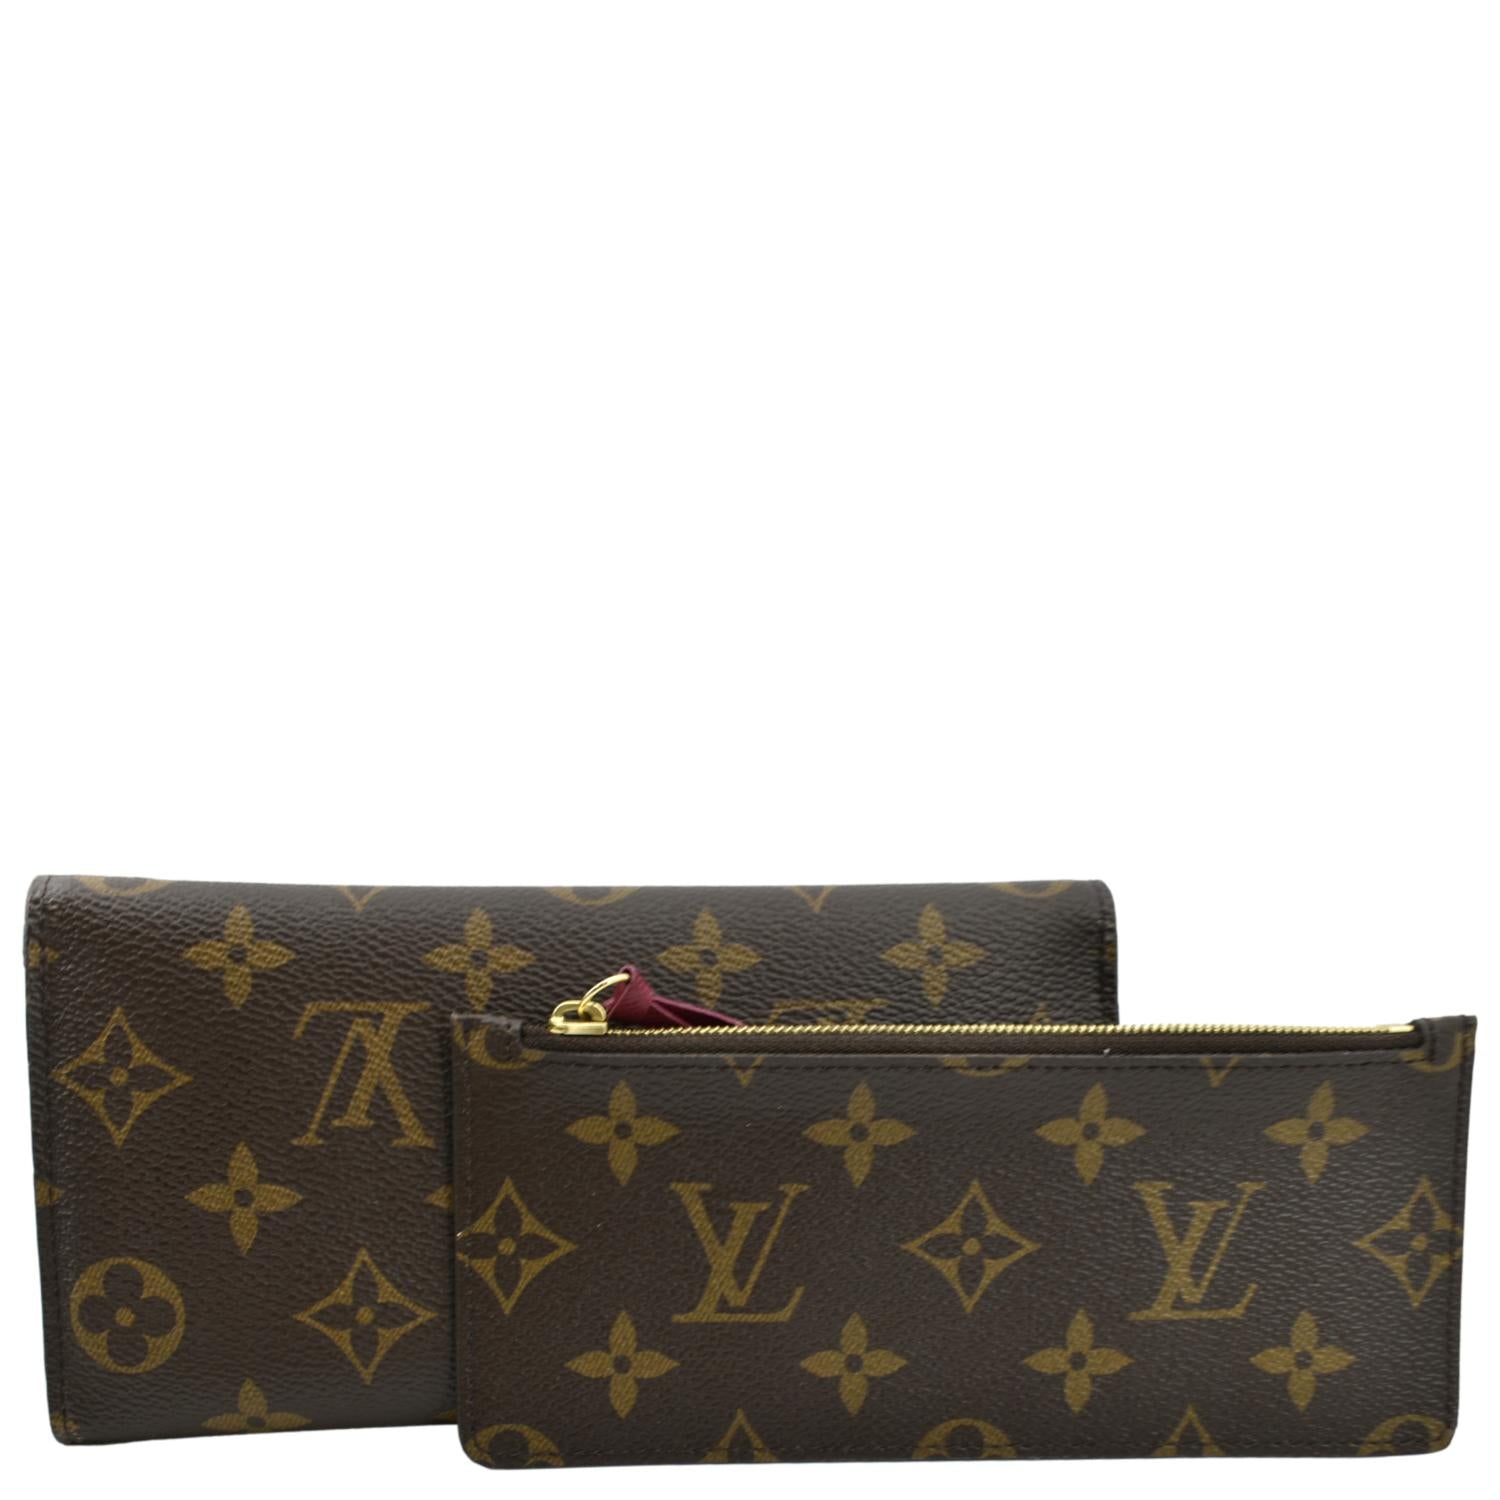 100% Authentic Louis Vuitton Small Canvas Wallet Made In France